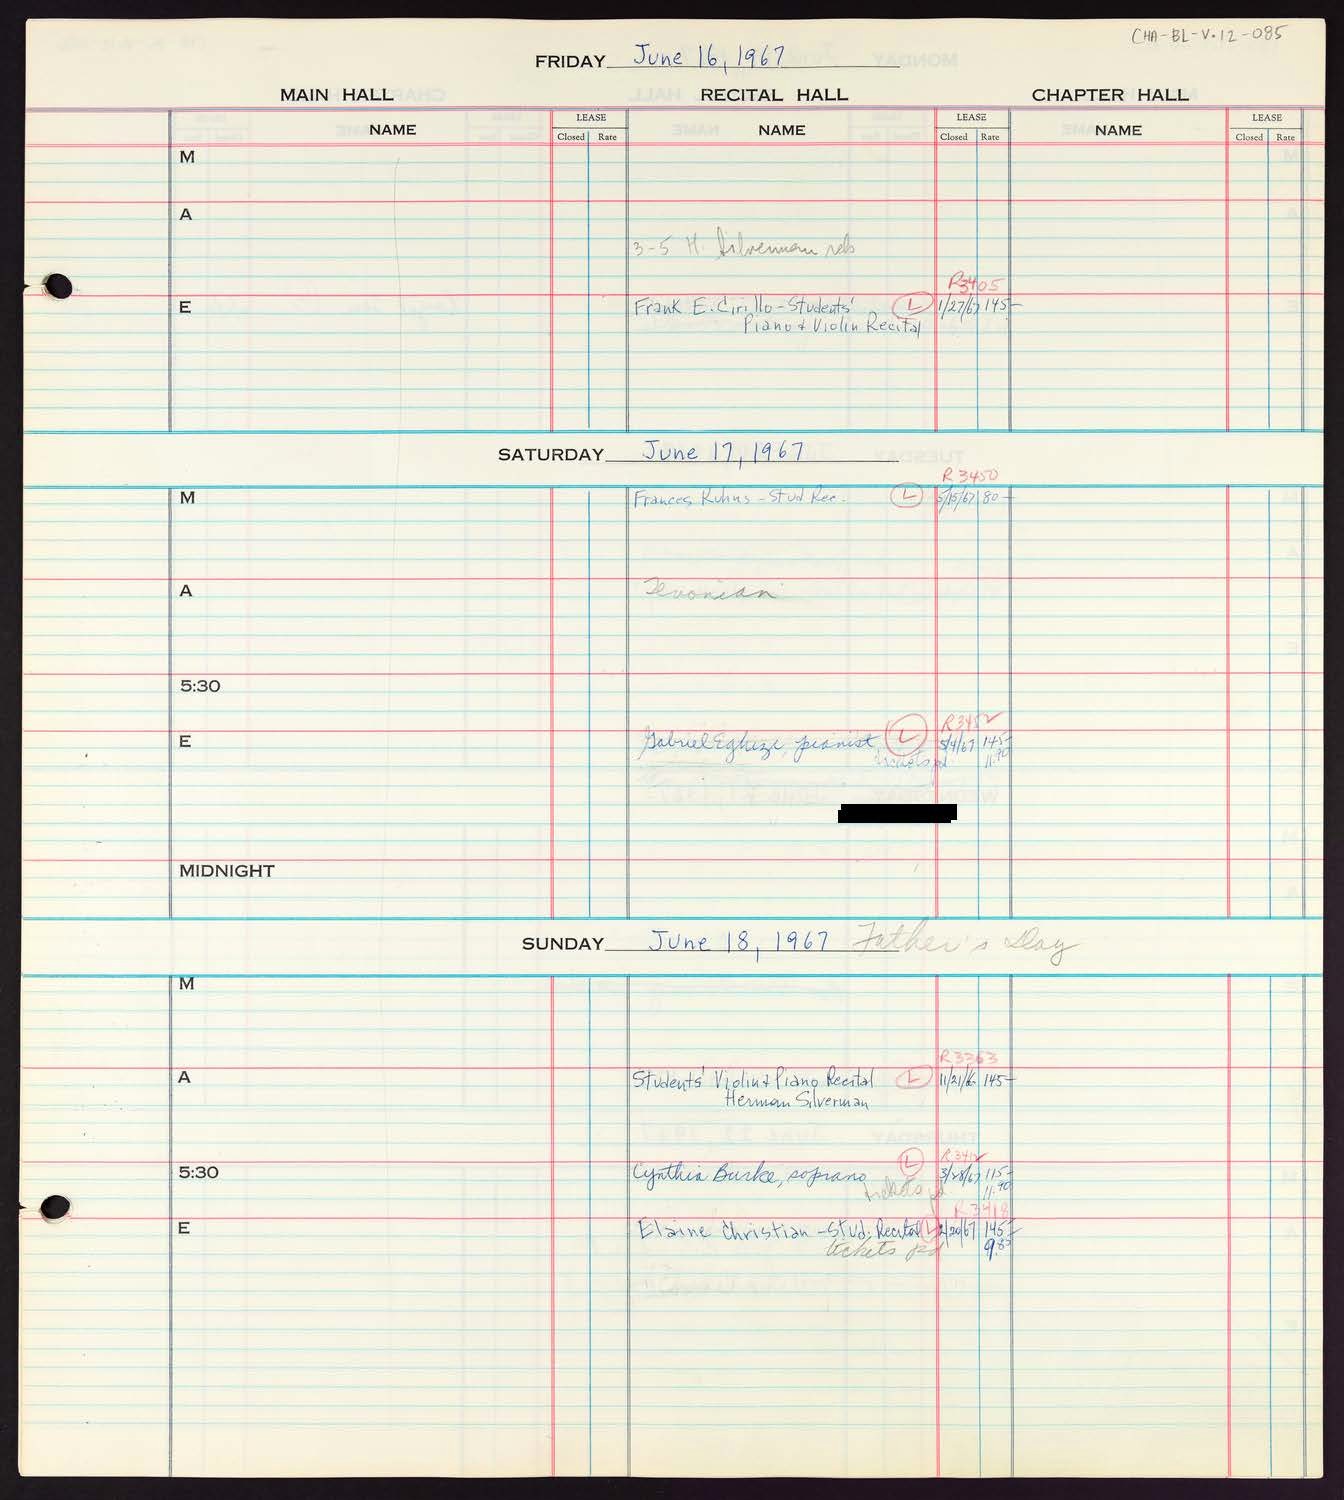 Carnegie Hall Booking Ledger, volume 12, page 85